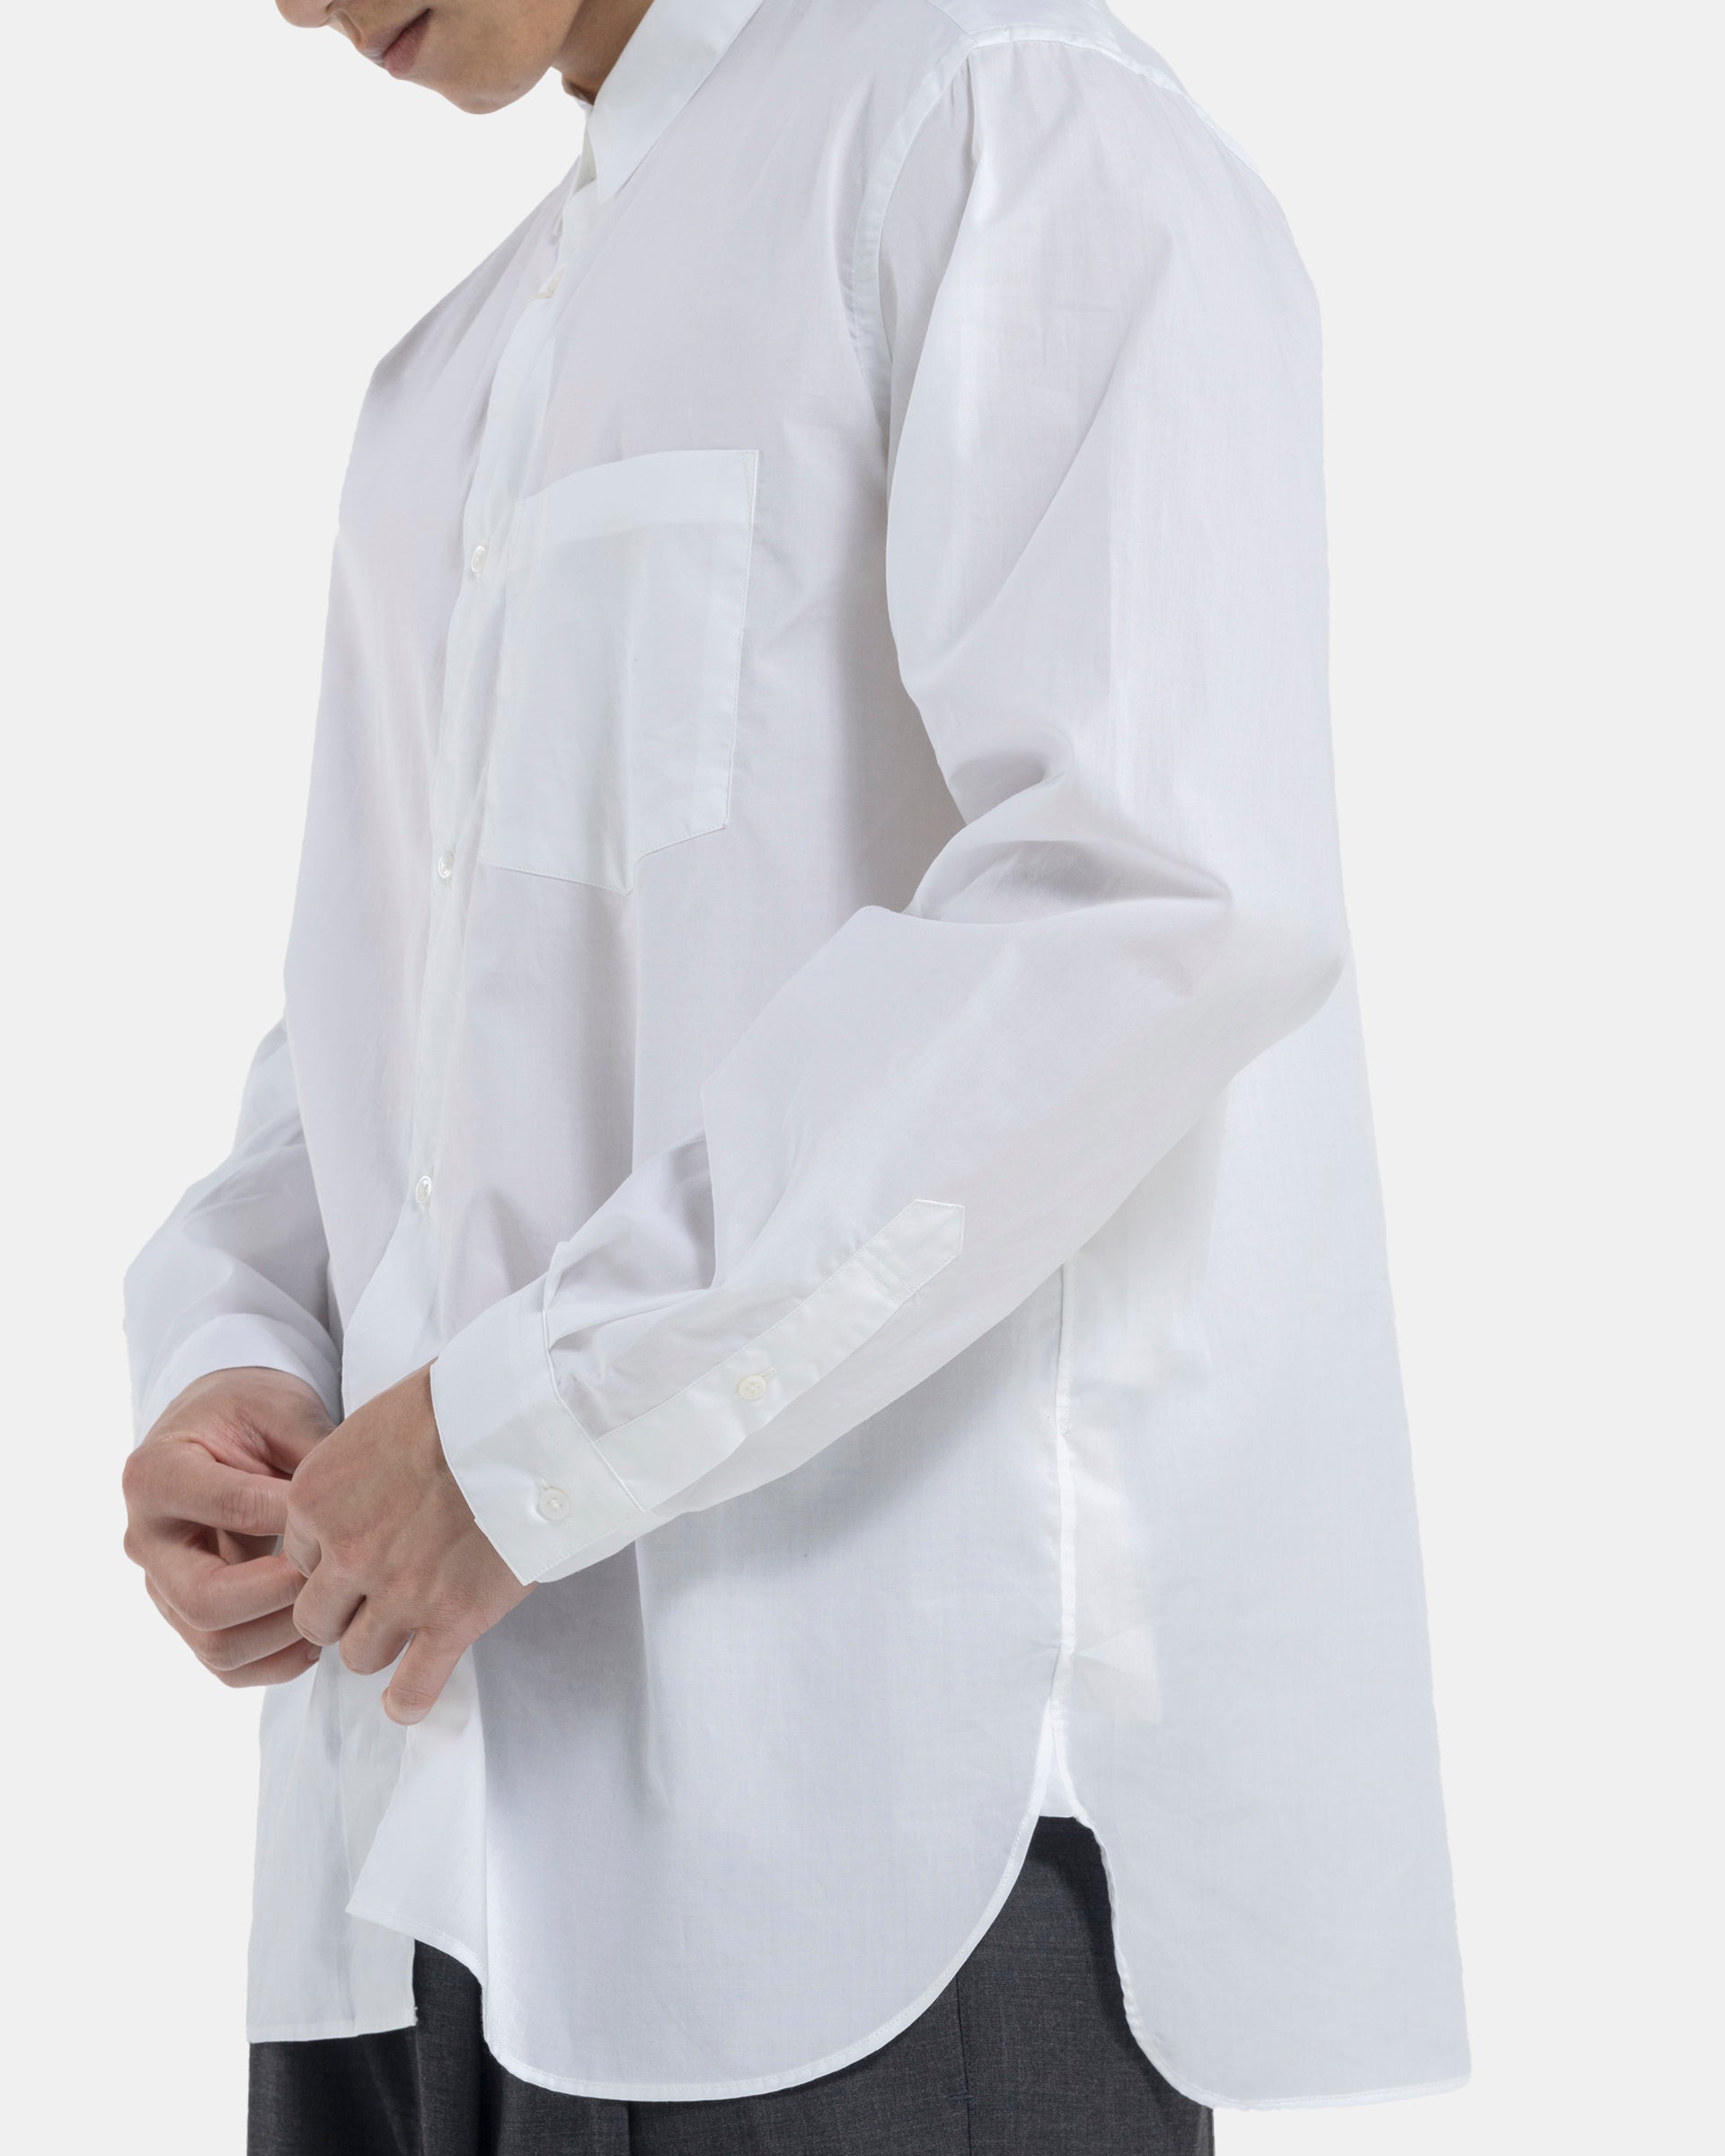 Male model wearing white Still By Hand shirt on white background